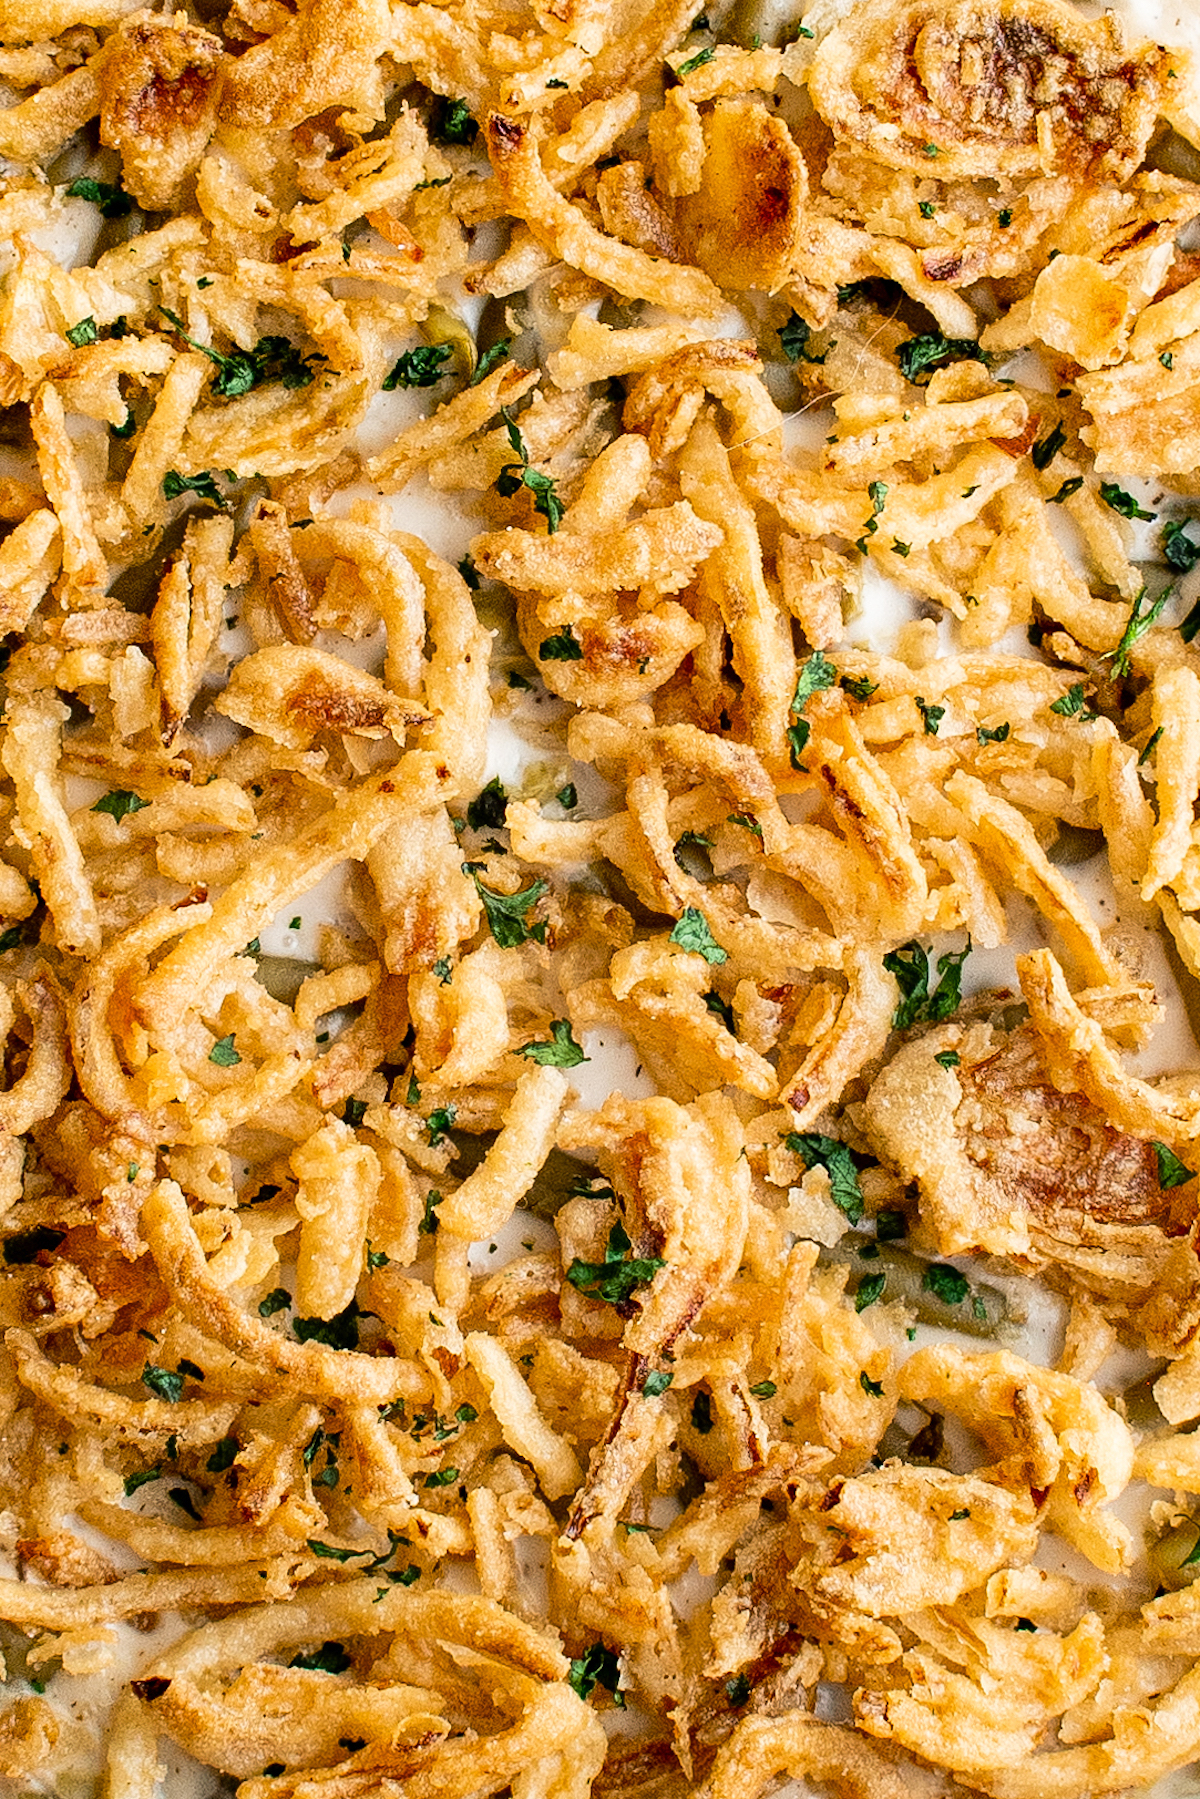 Close-up shot of holiday casserole, showing the texture of the crispy onion topping.